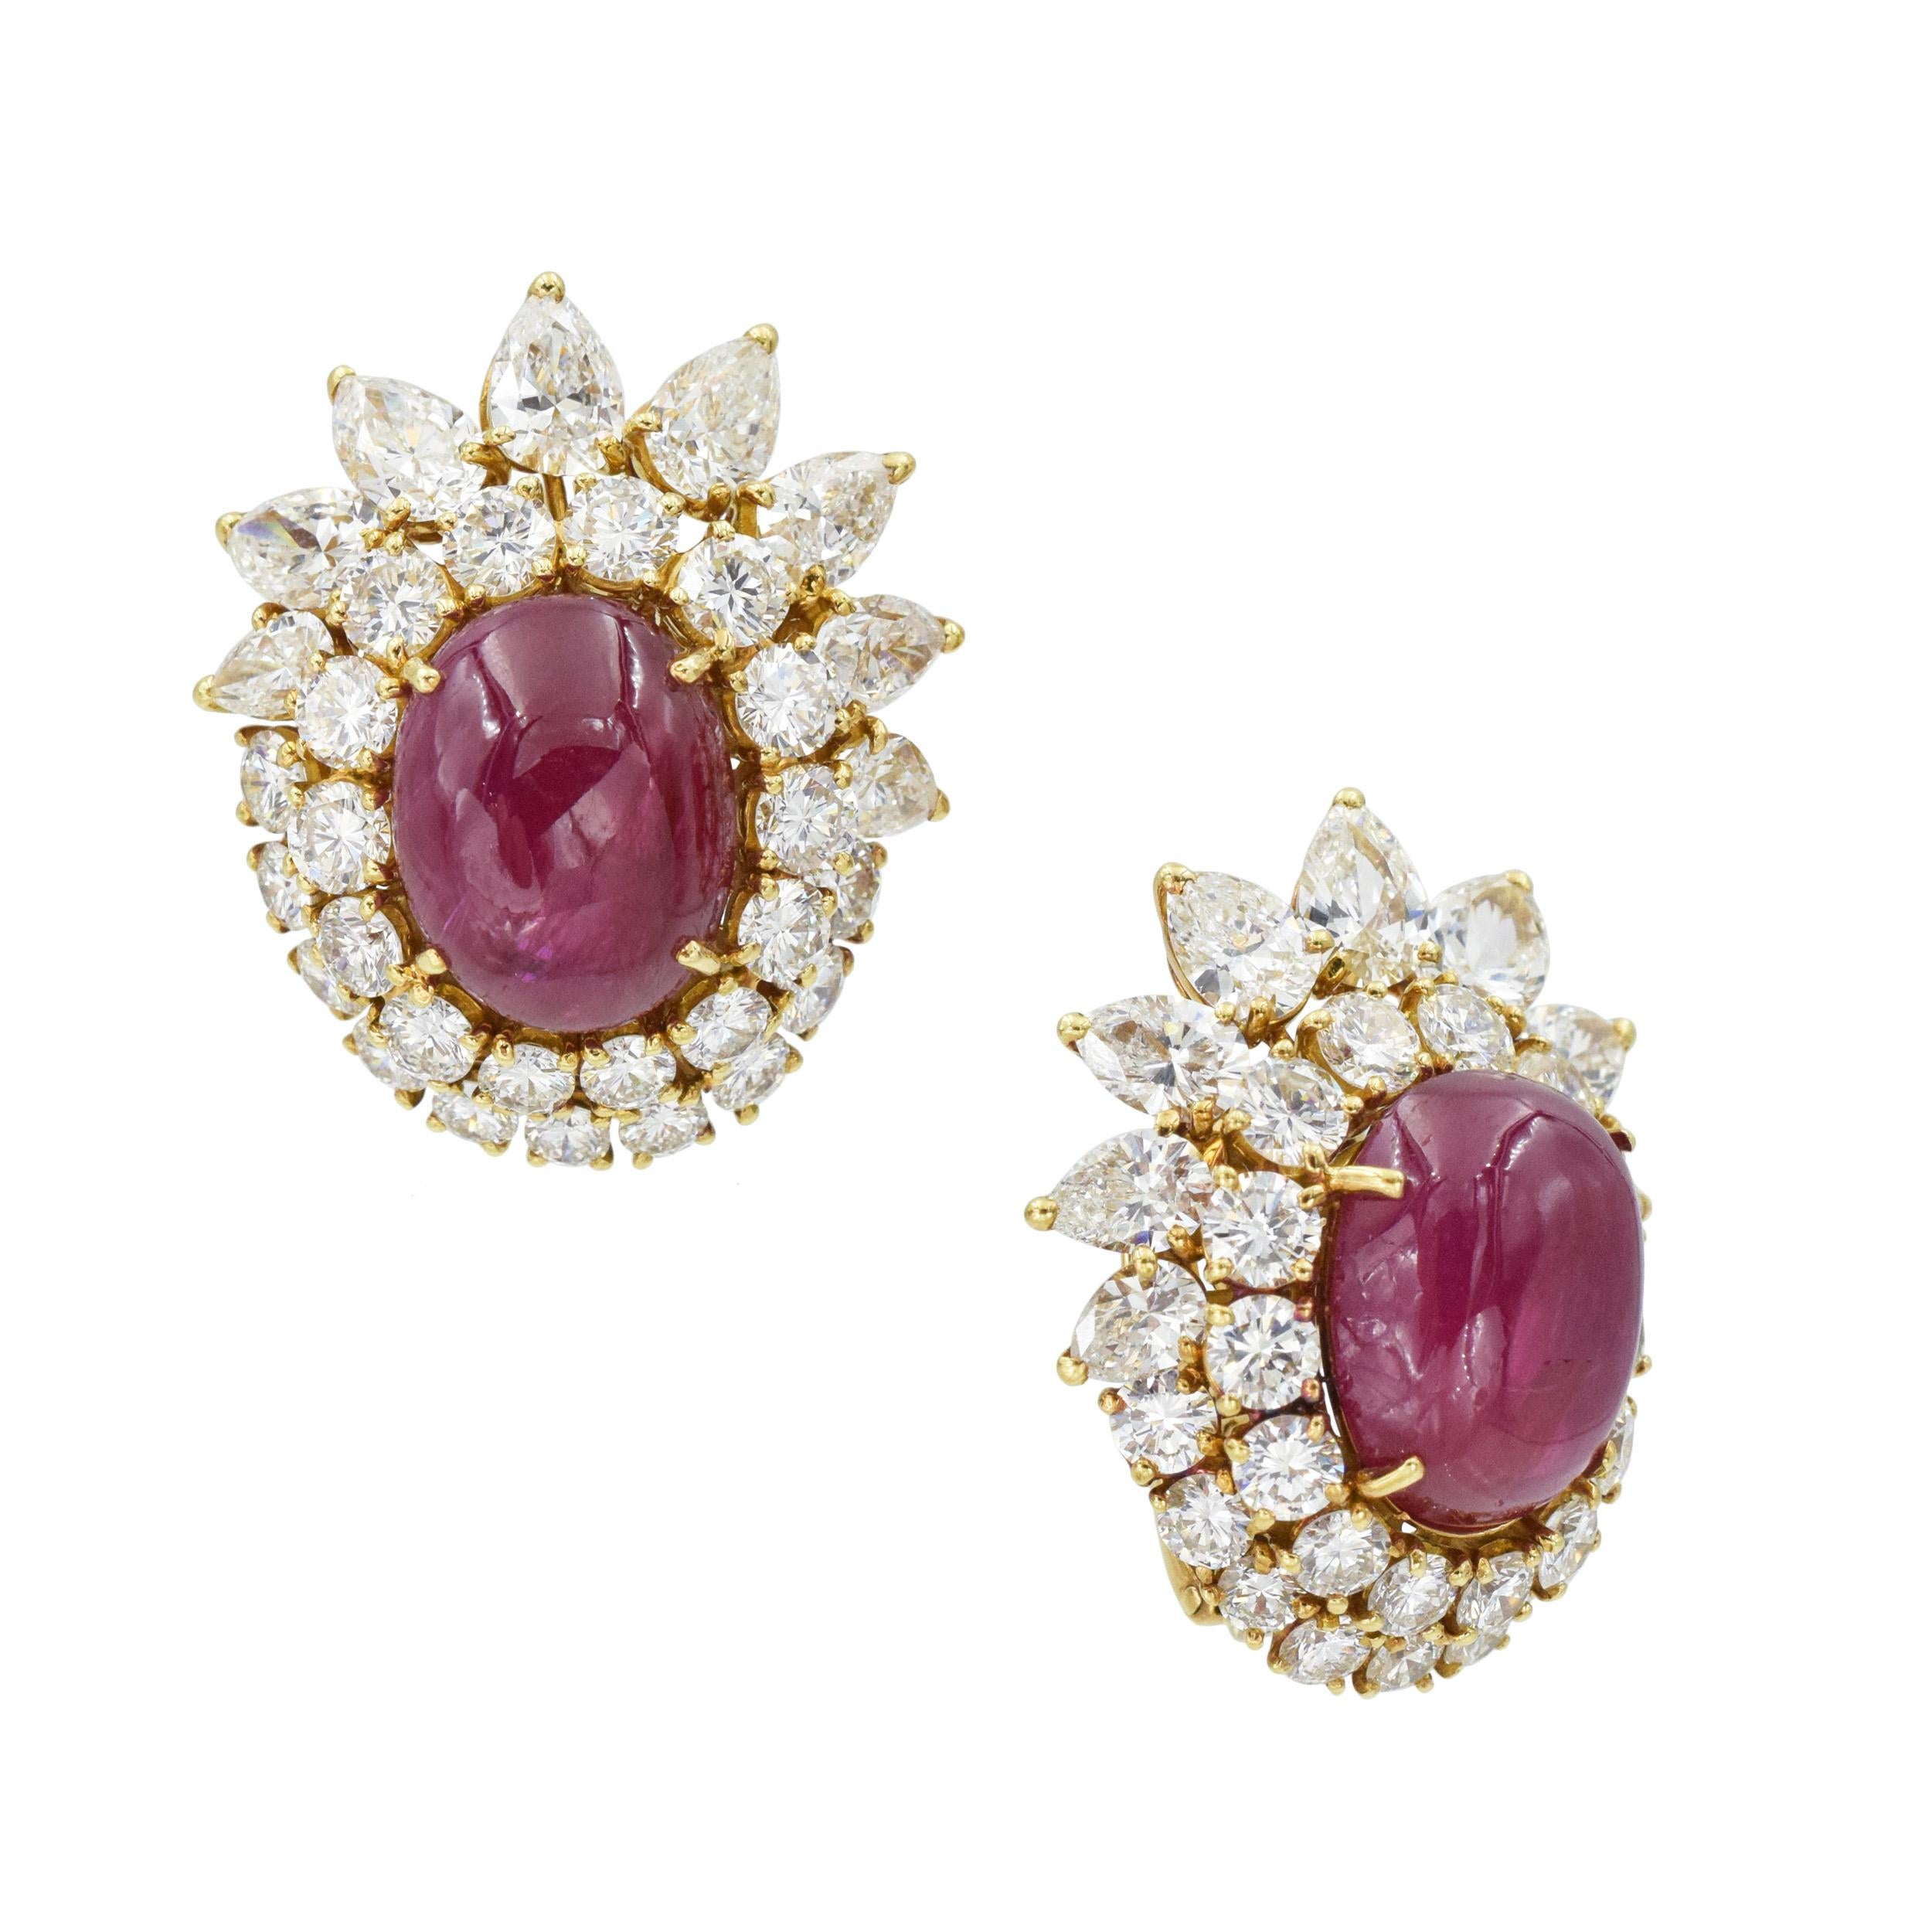 Oval Cut Van Cleef & Arpels Ruby and Diamond Earrings and Ring